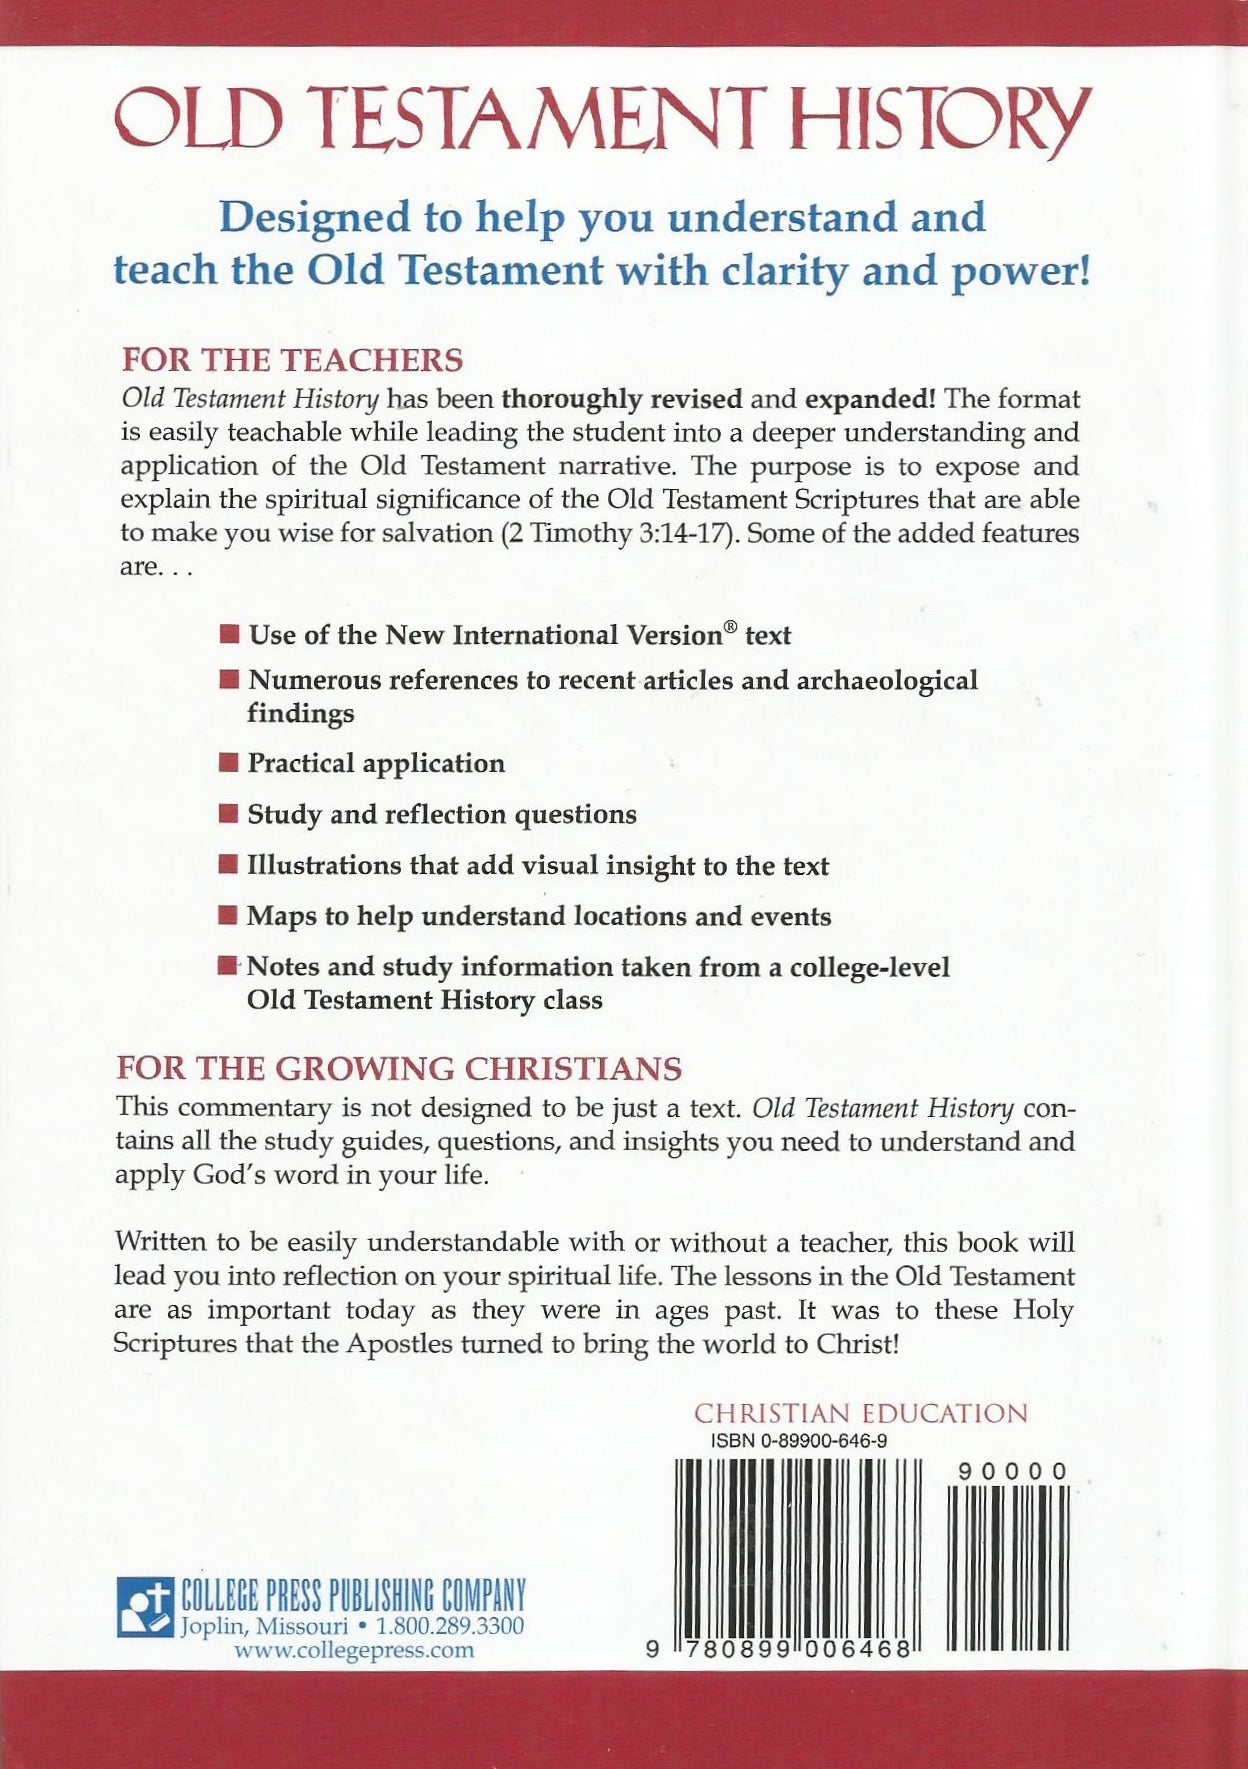 Old Testament History: An Overview of Sacred History & Truth